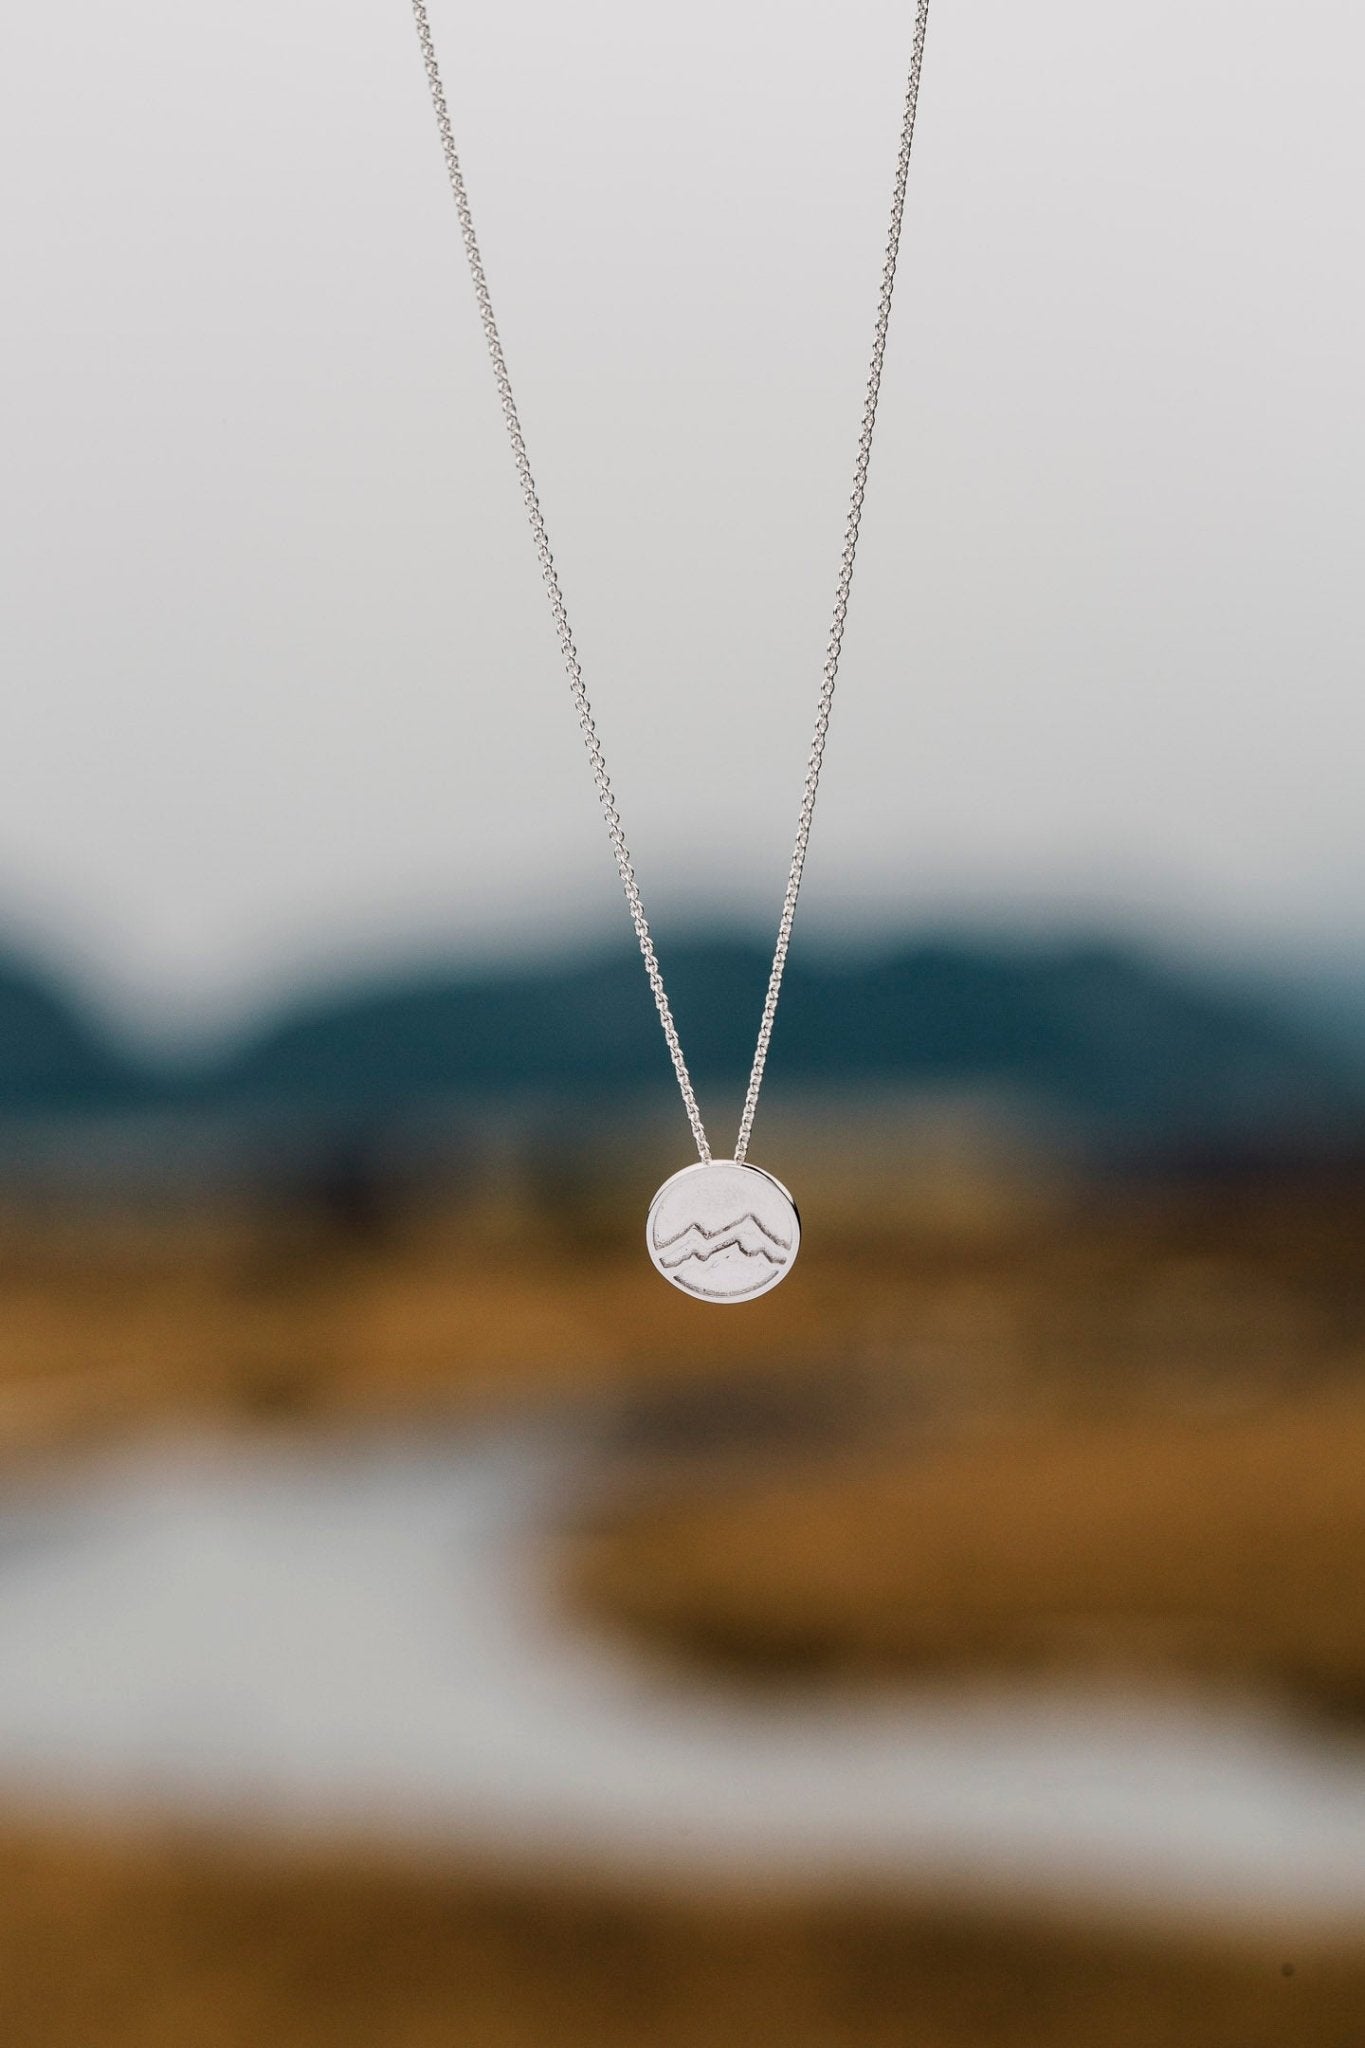 Small Mountain medallion silver pendant necklace shown with blurred blurred river background